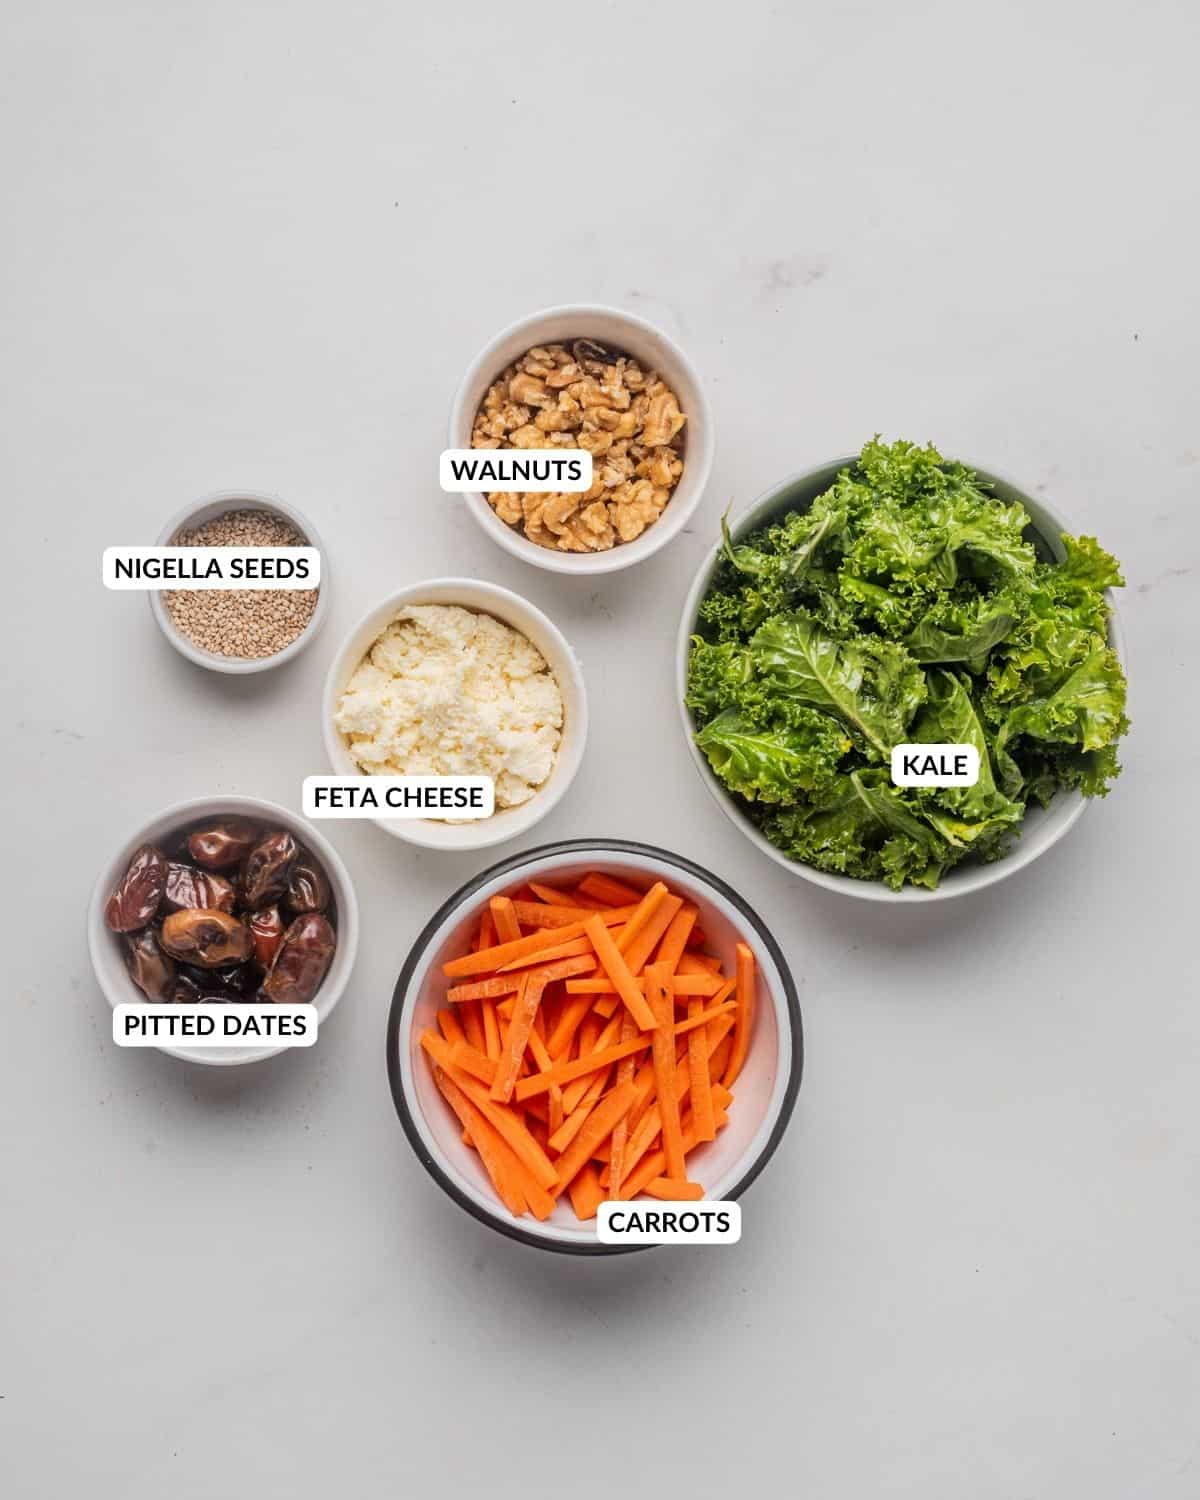 An image of kale salad ingredients in separate bowls with labels.